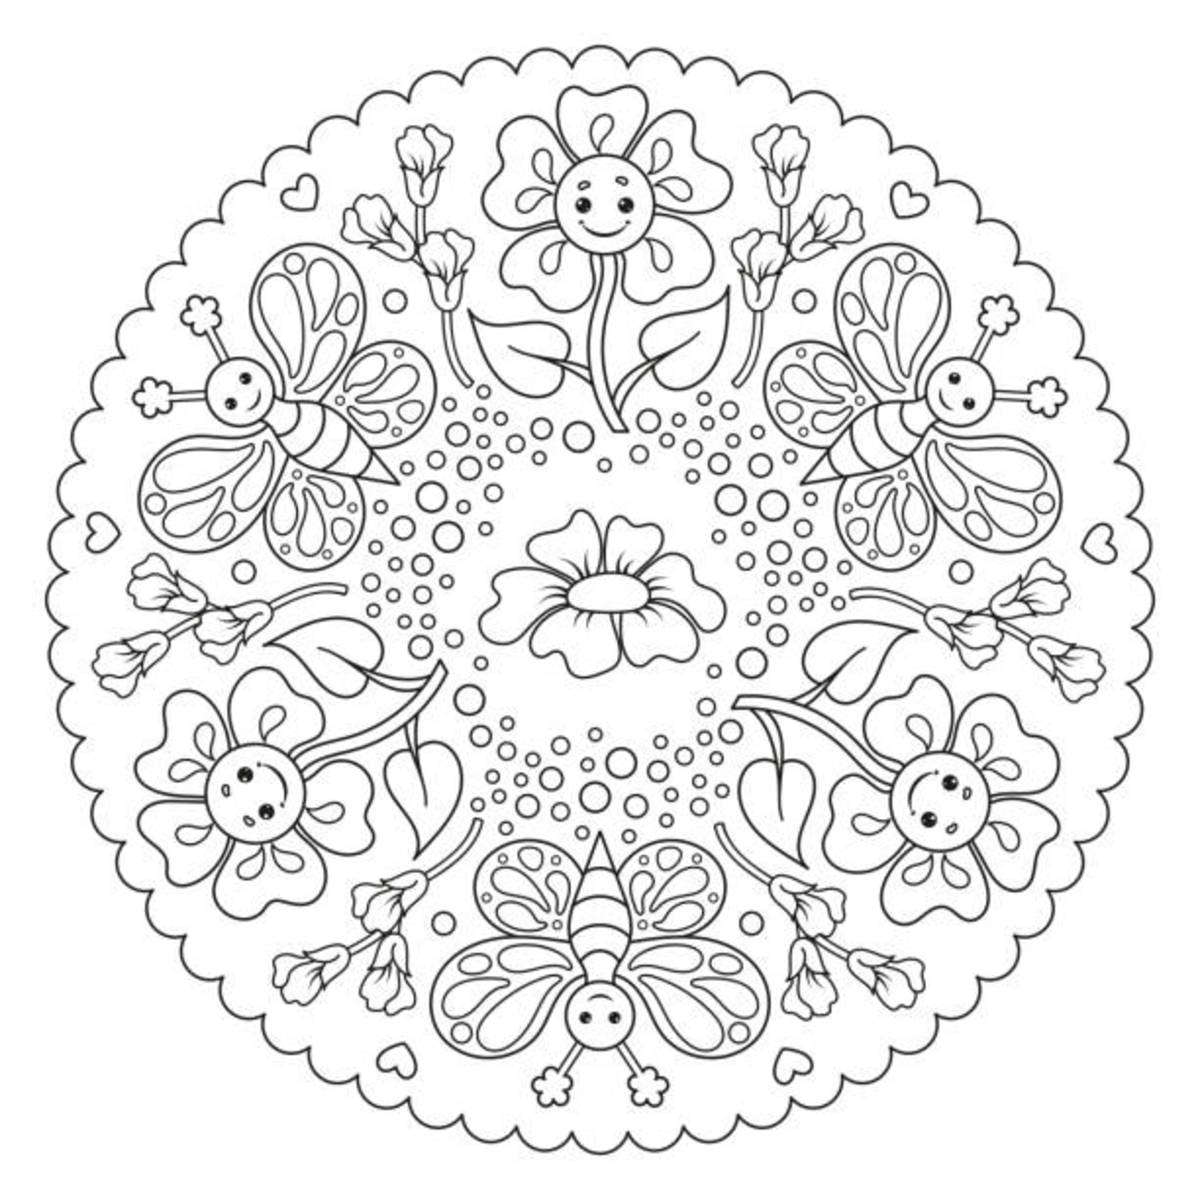 Butterfly coloring pages free printable sheets